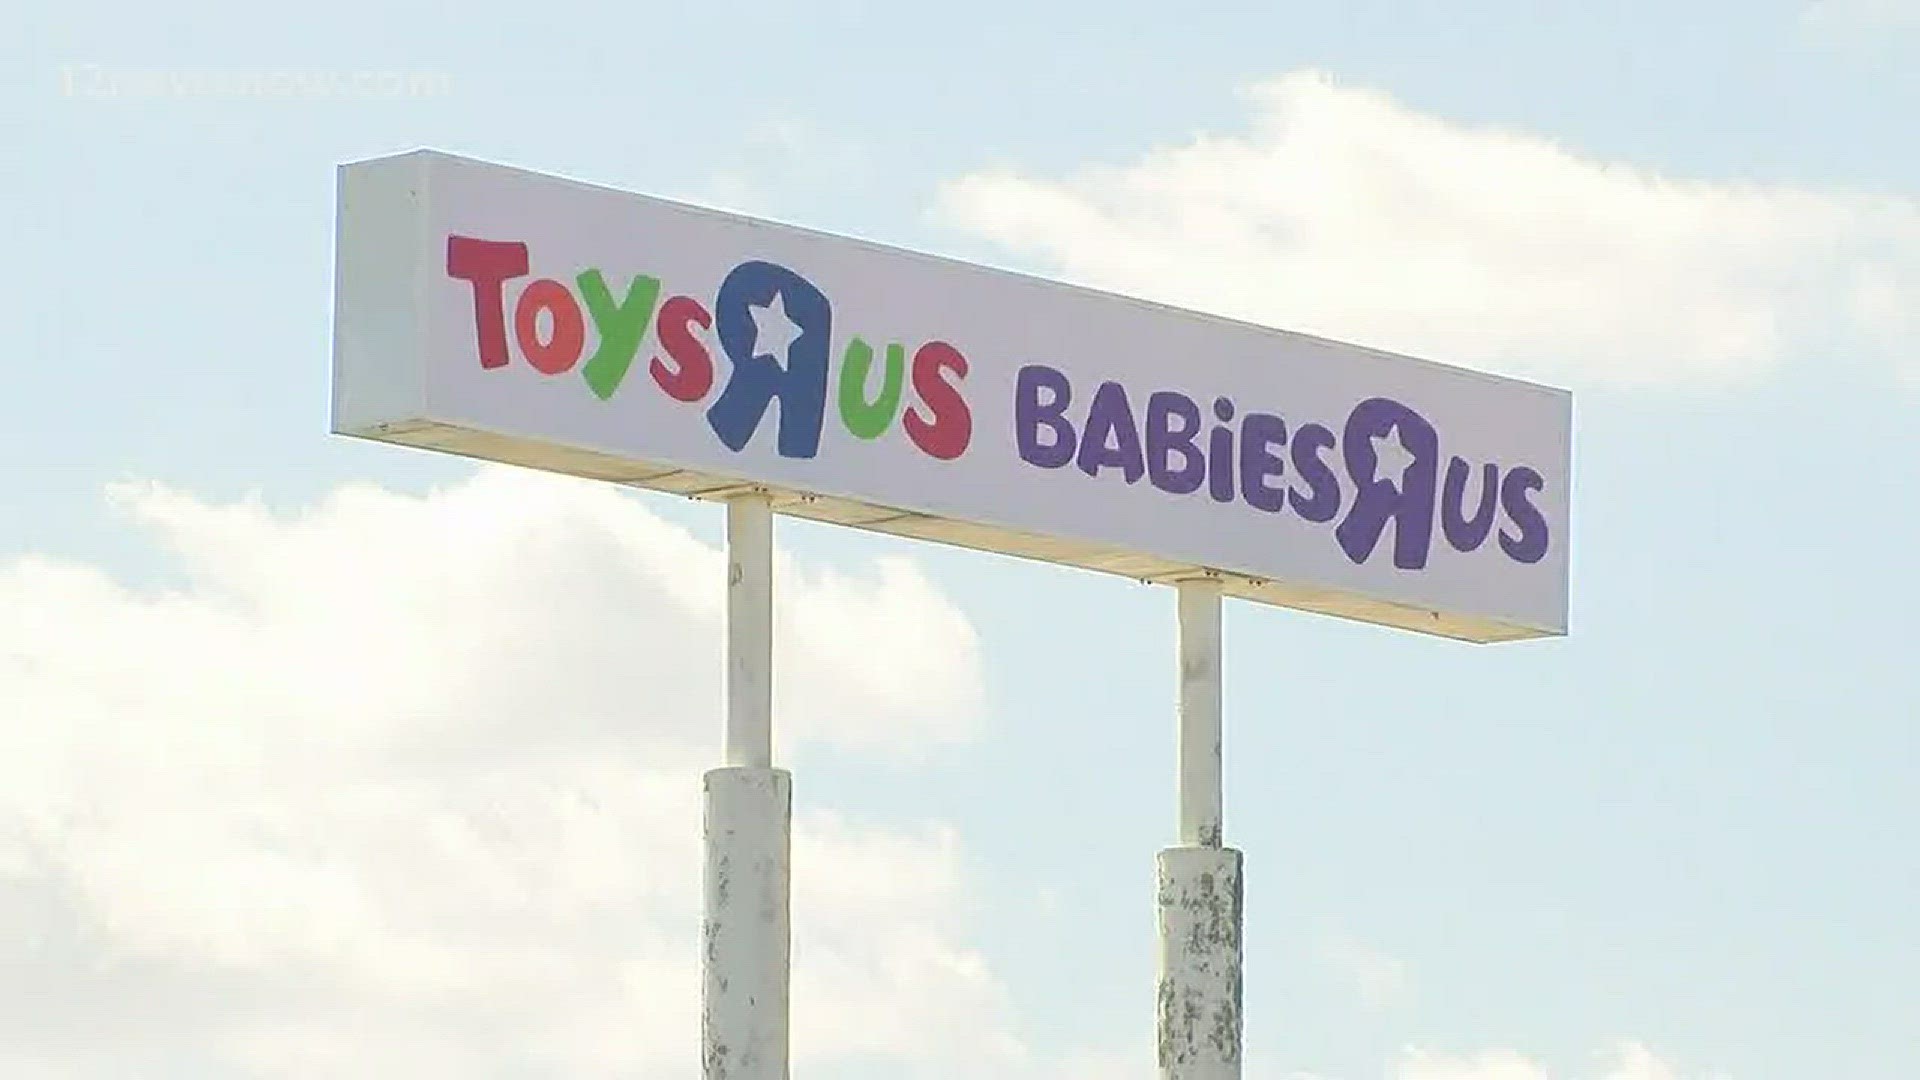 Beaumont residents rush to Toys R Us stores to spend their gift cards